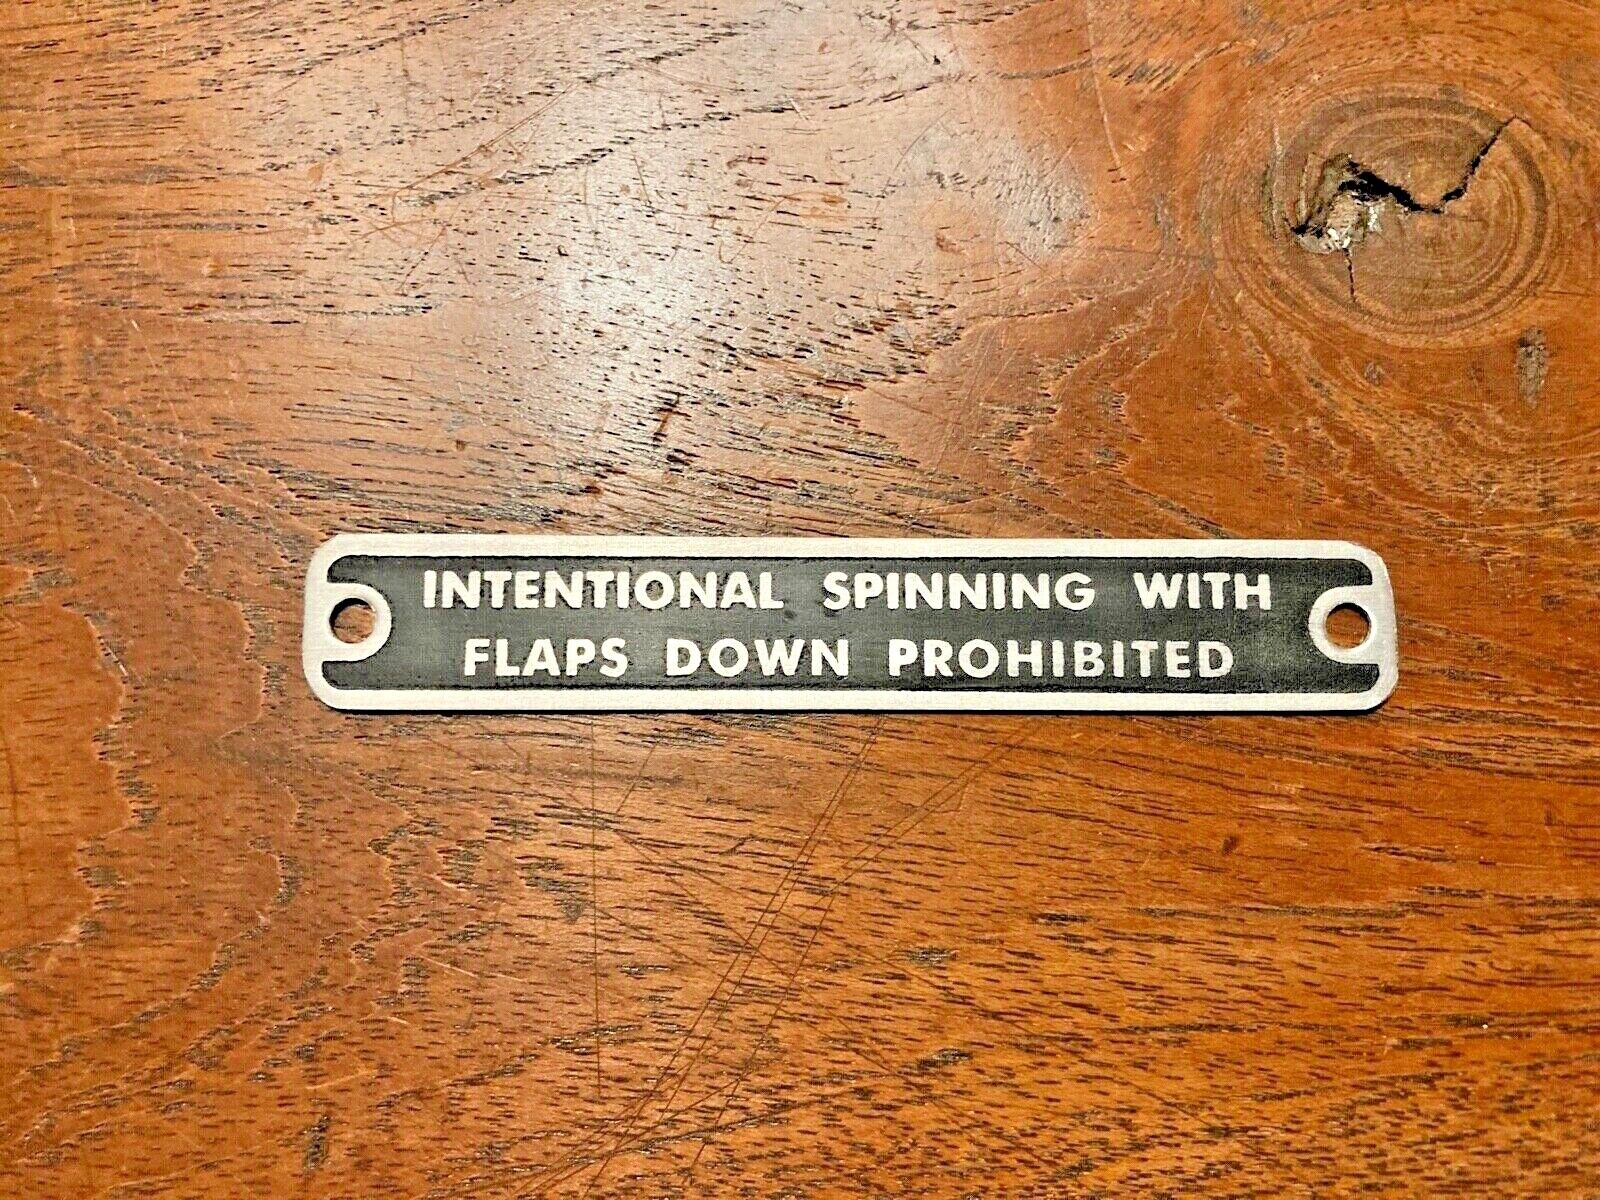 New “Intentional Spinning With Flaps Down Prohibited” Super Cub, Cessna 120, 140